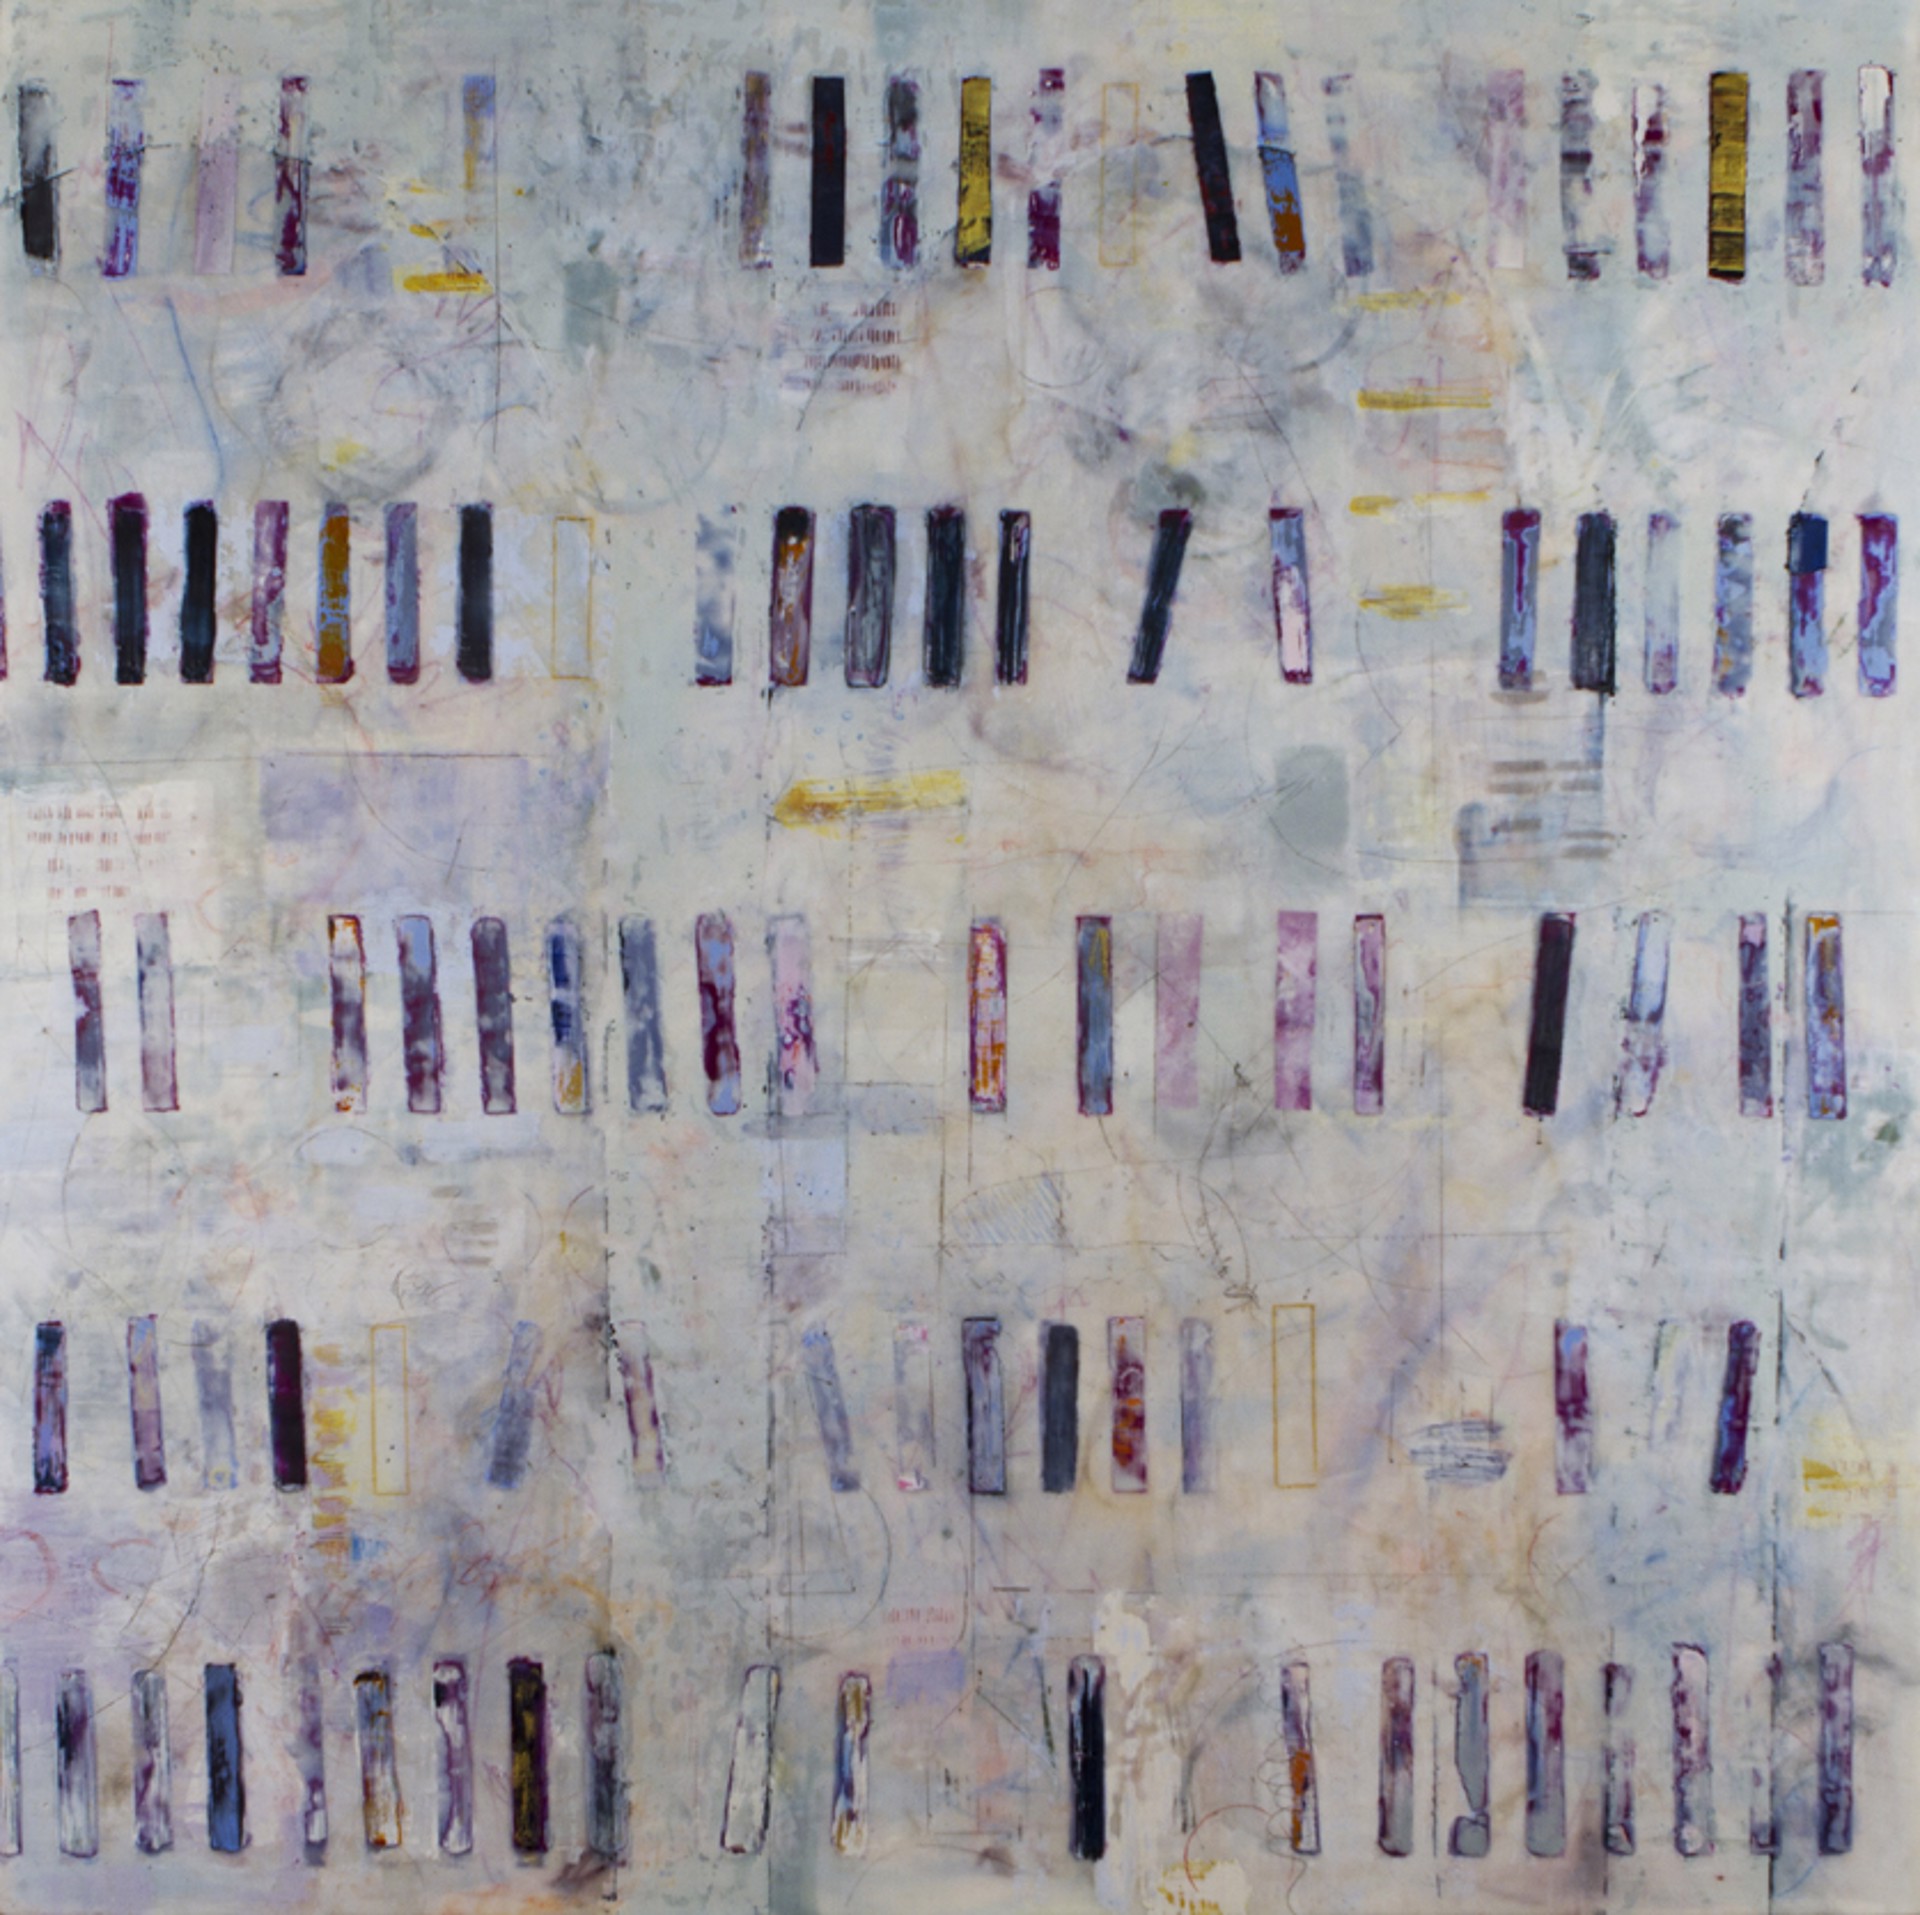 Sequencing by Kathy Hughes